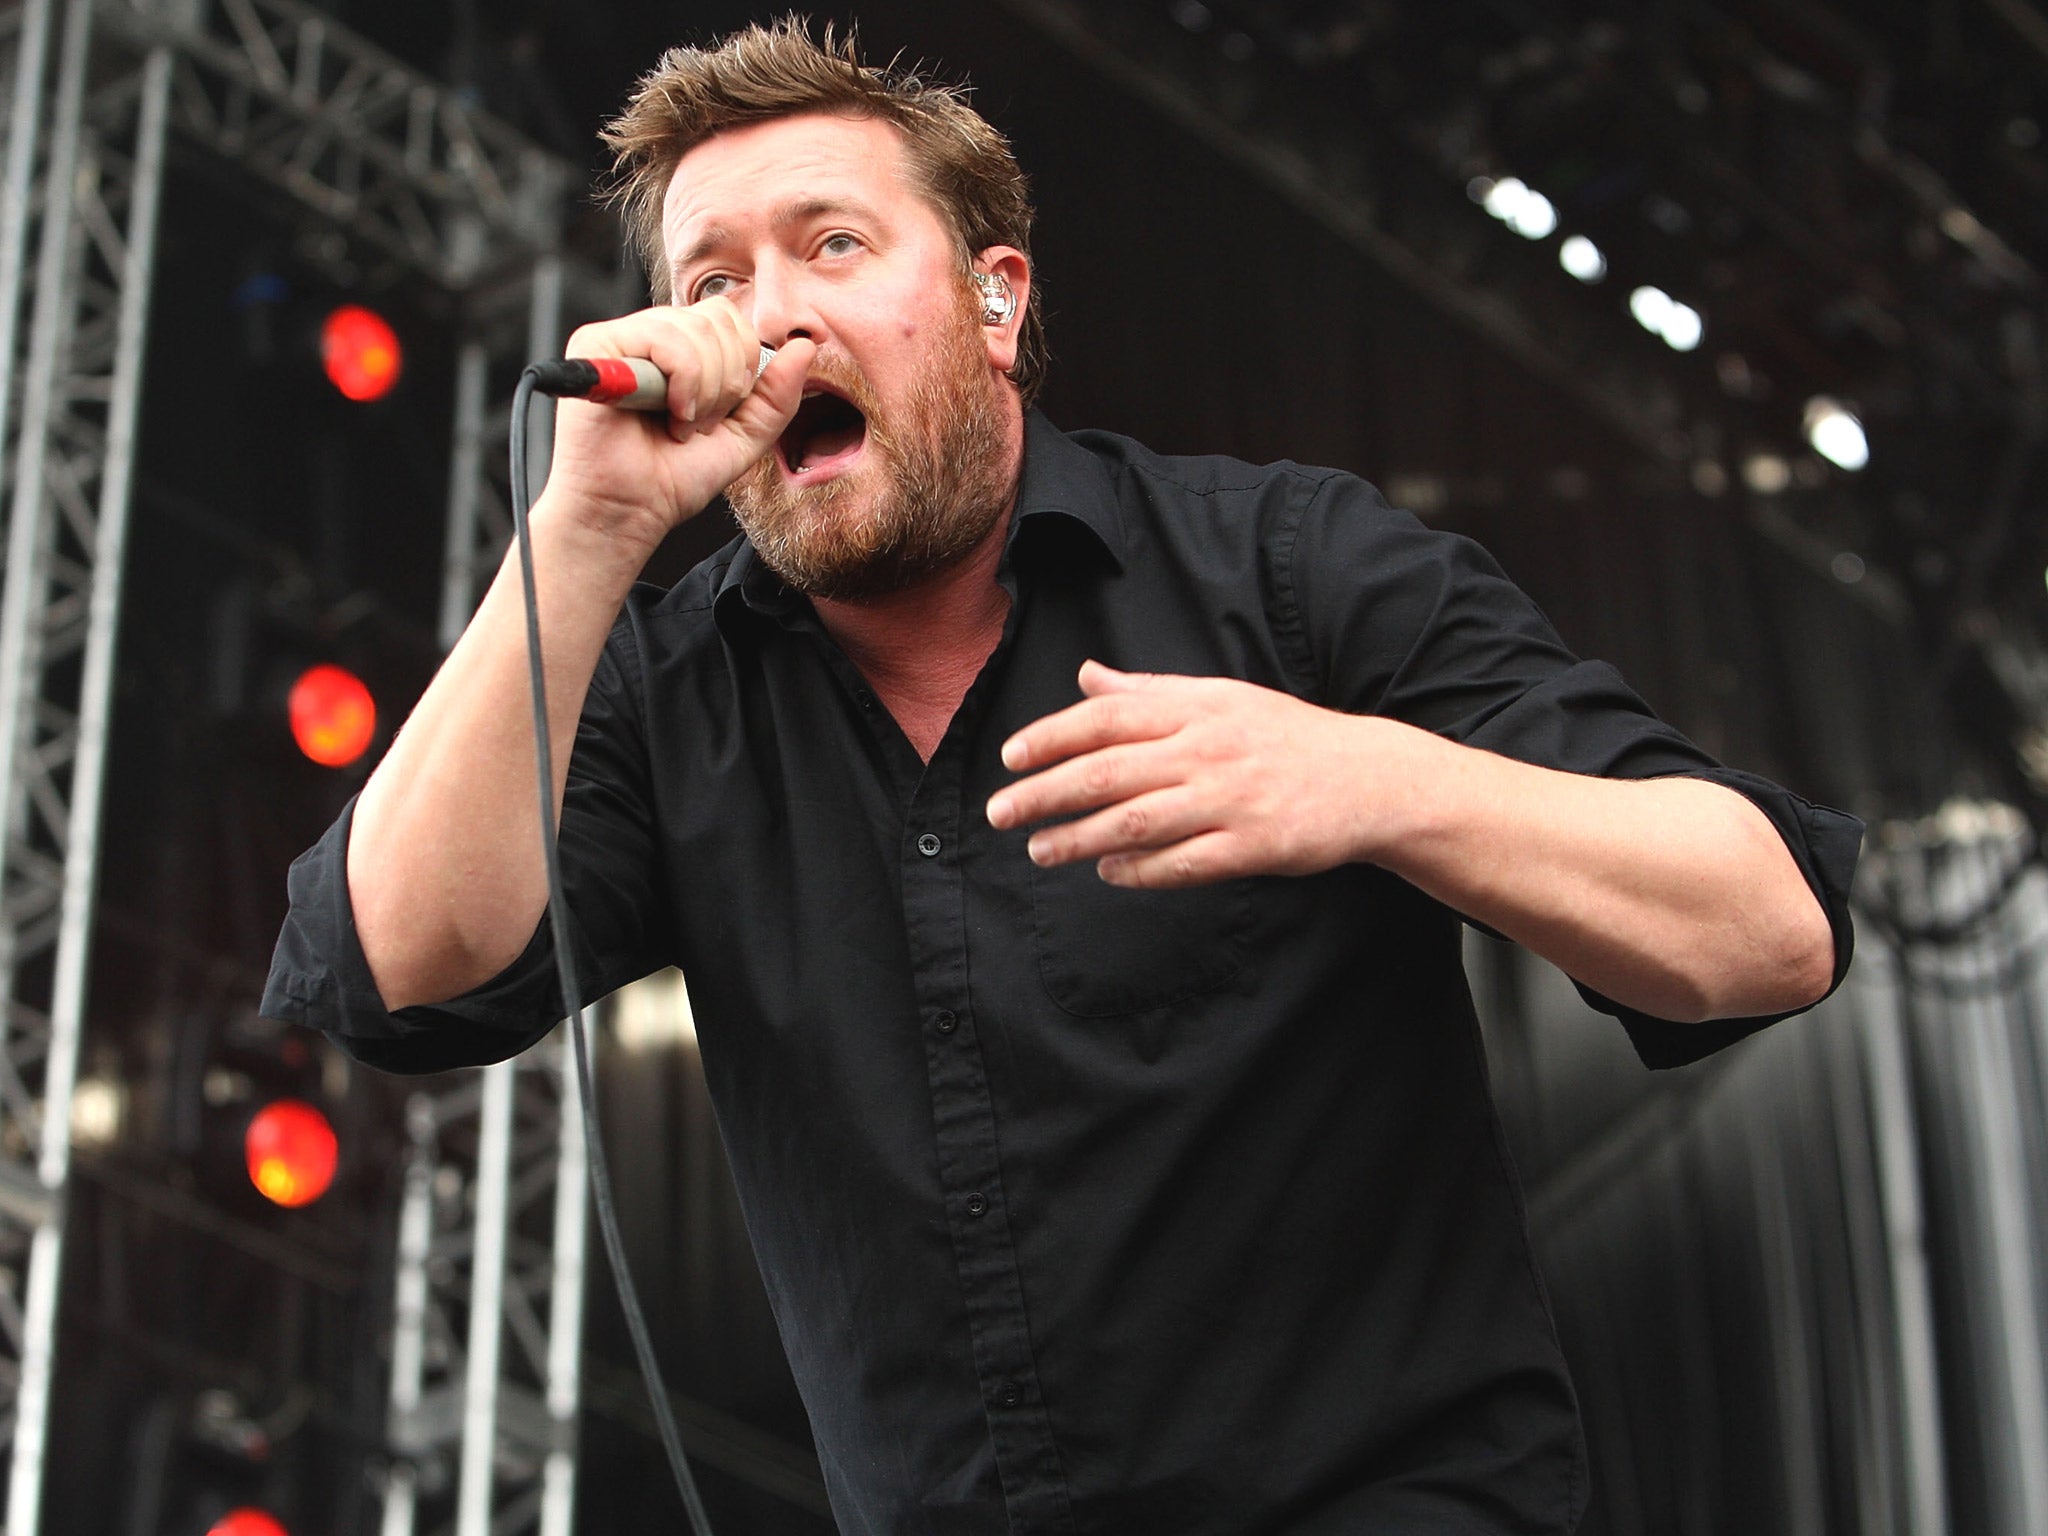 Elbow frontman Guy Garvey performs on stage